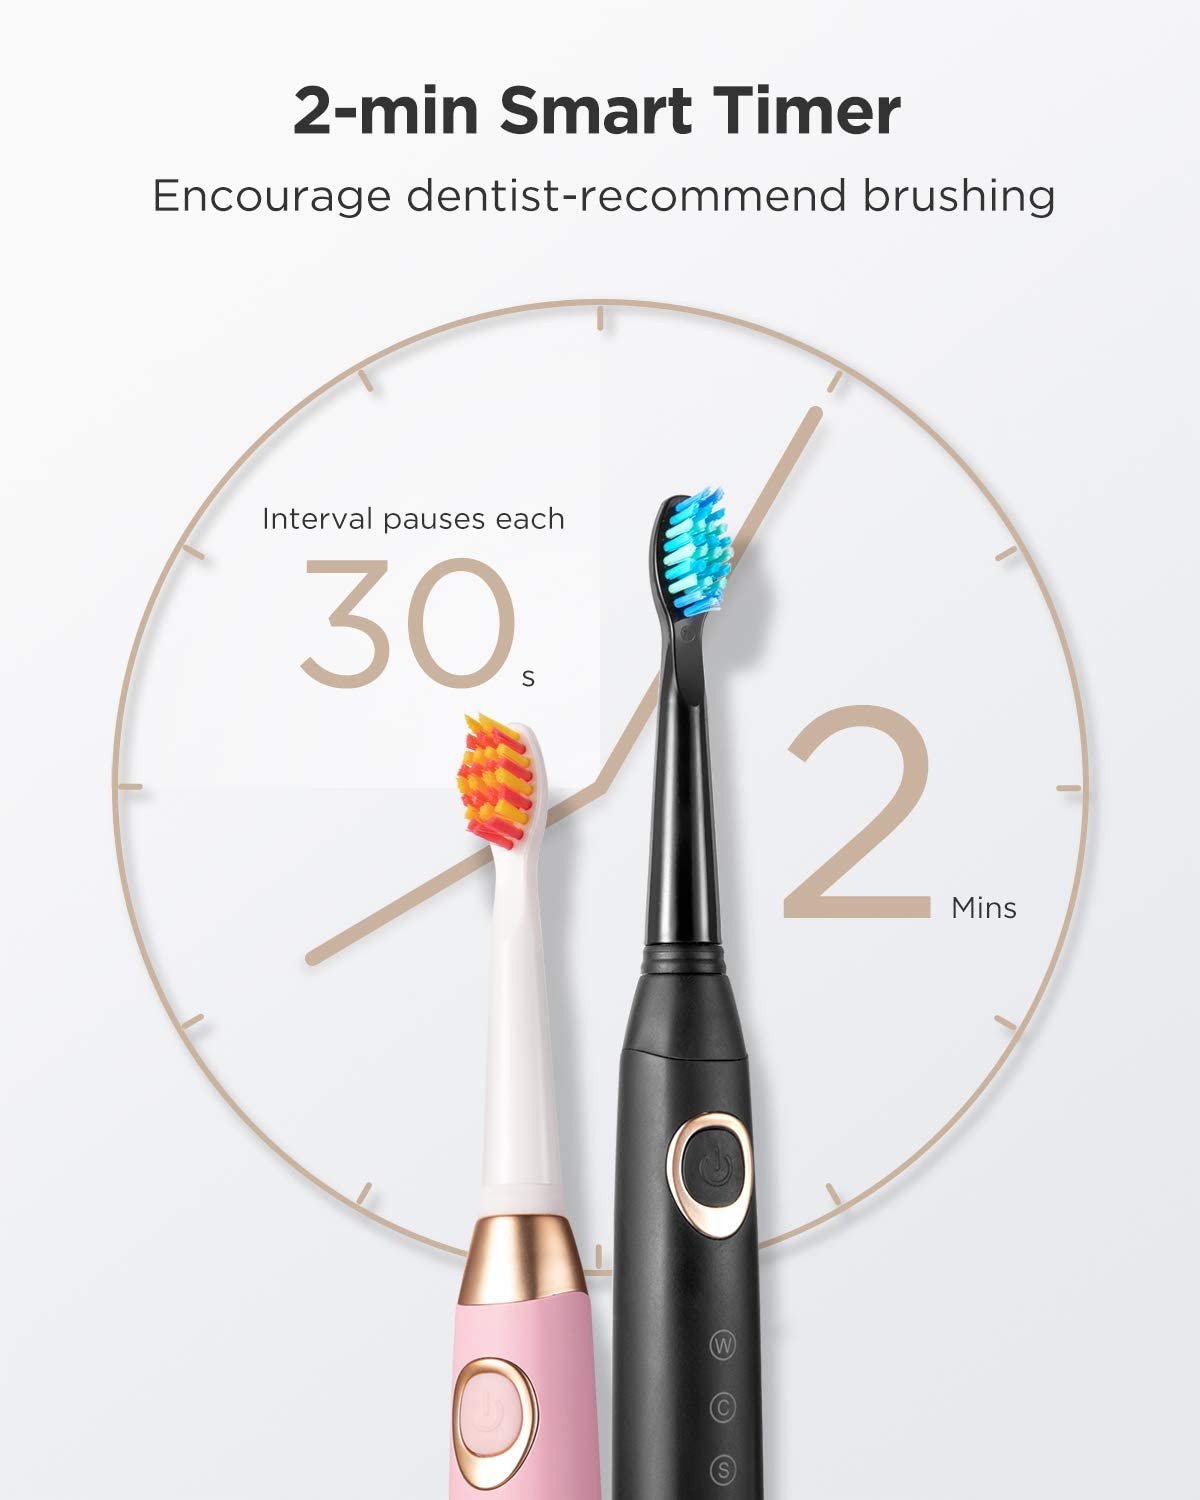 Fairywill Sonic Electric Toothbrush ADA Accepted FW508 Smart Timer Combination USB Rechargeable for Adult Dental Healthy Modes